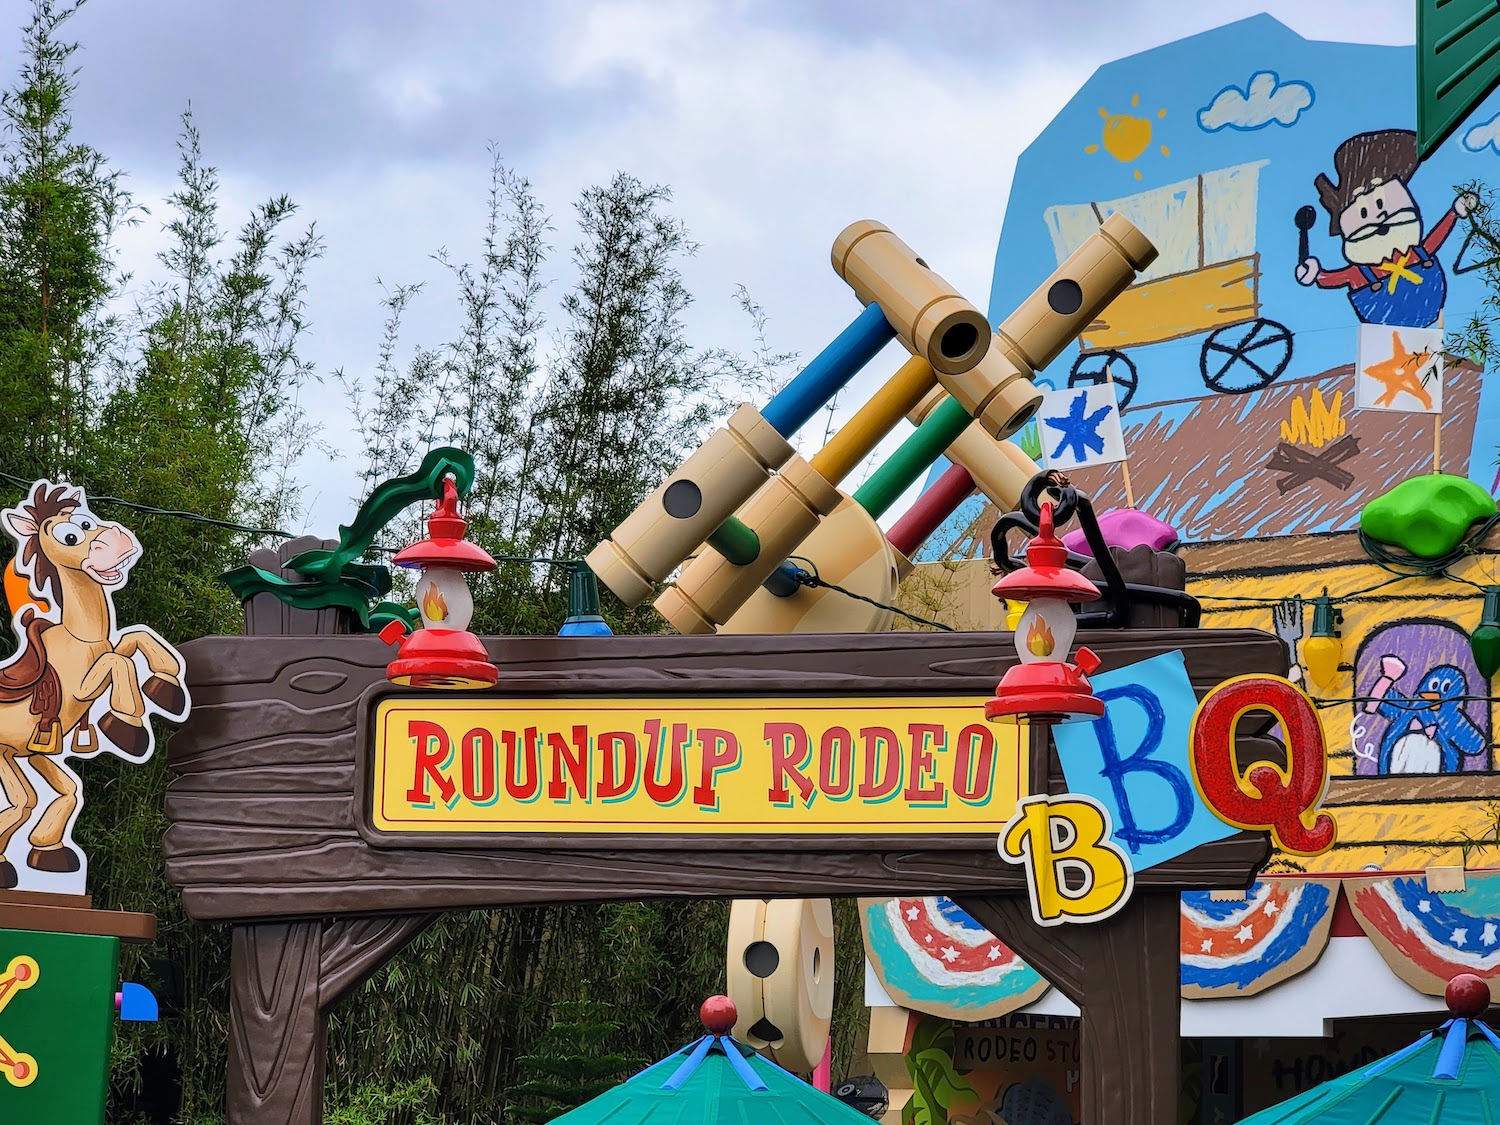 Roundup Rodeo BBQ Sign